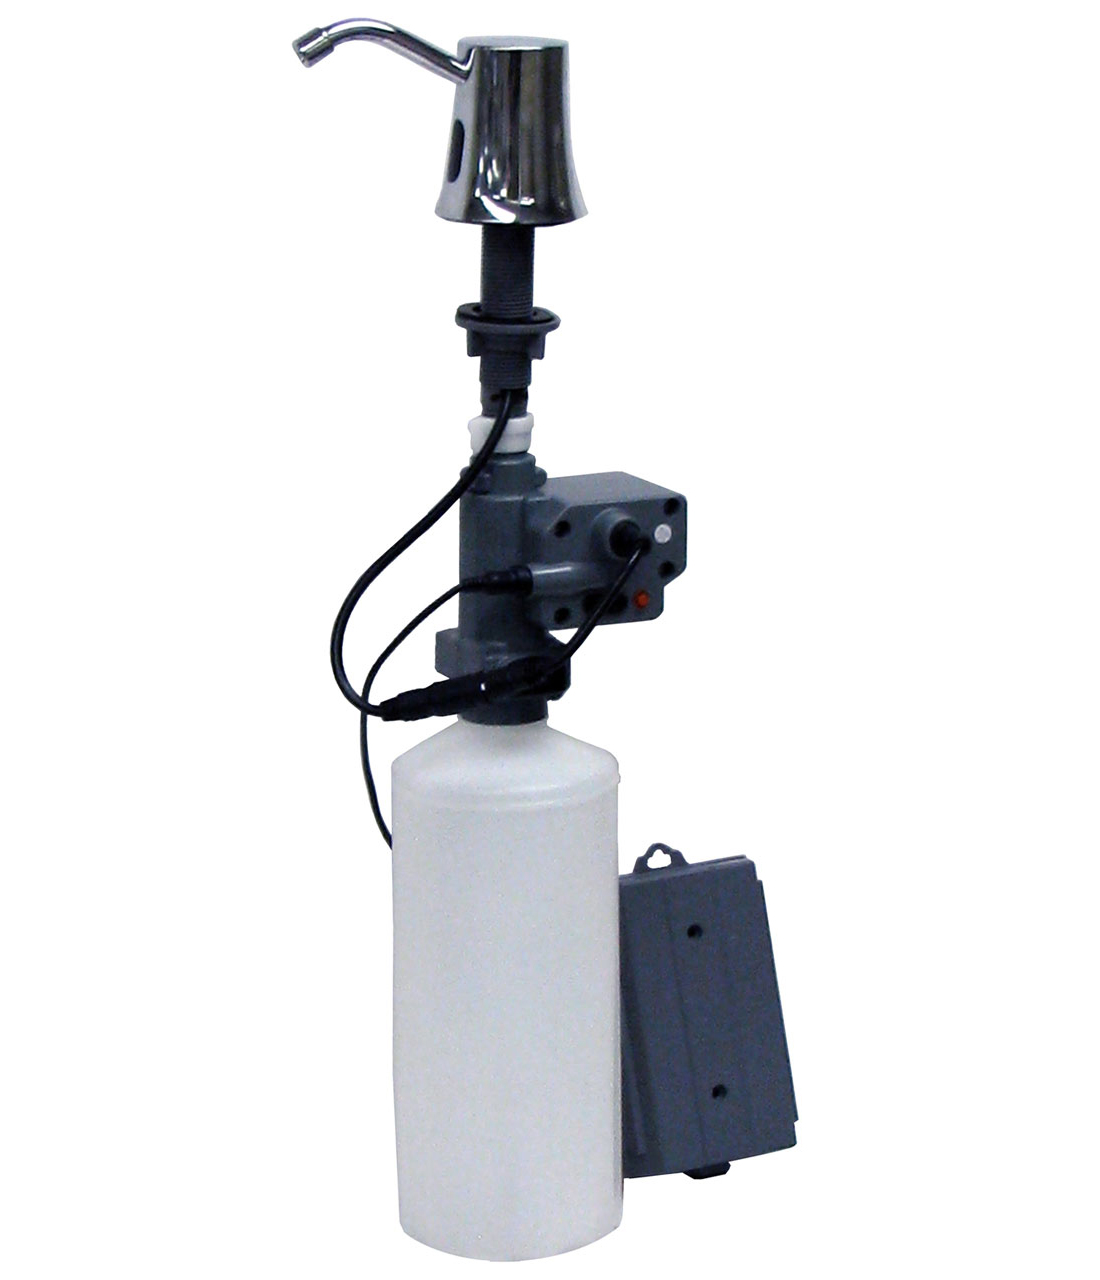 Automatic Basin-Mounted Soap Dispenser - (Model #: g-63sd) Image